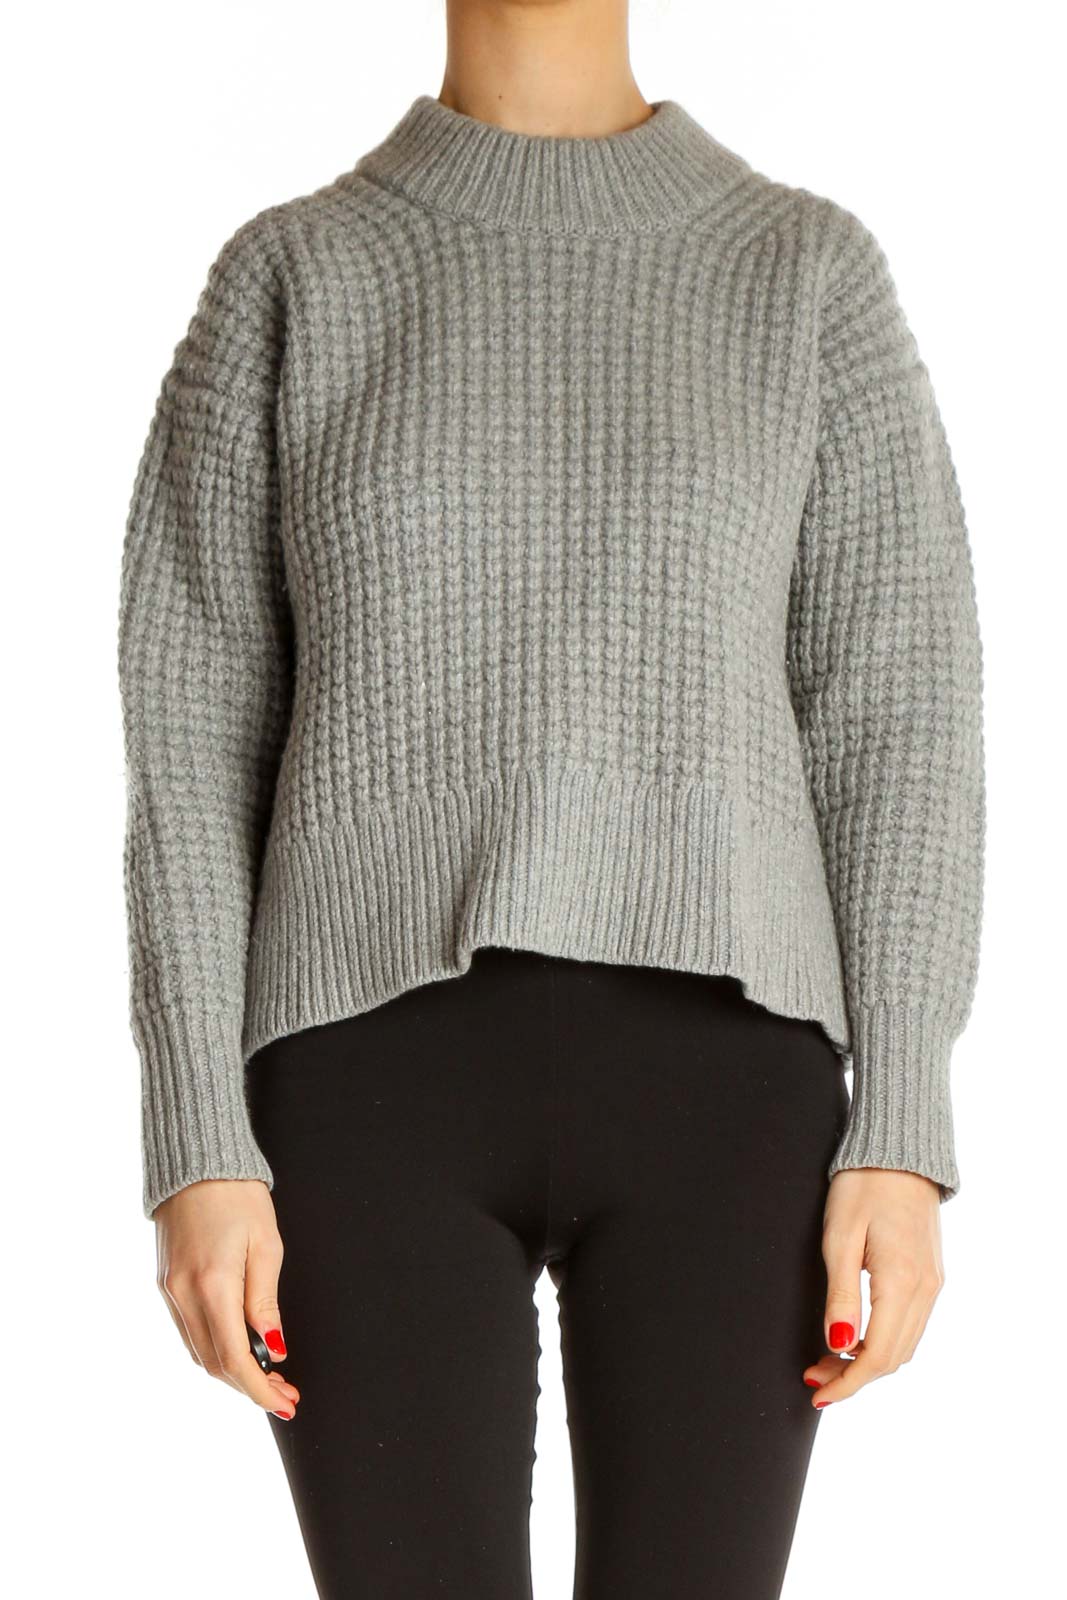 Gray Textured All Day Wear Sweater Front